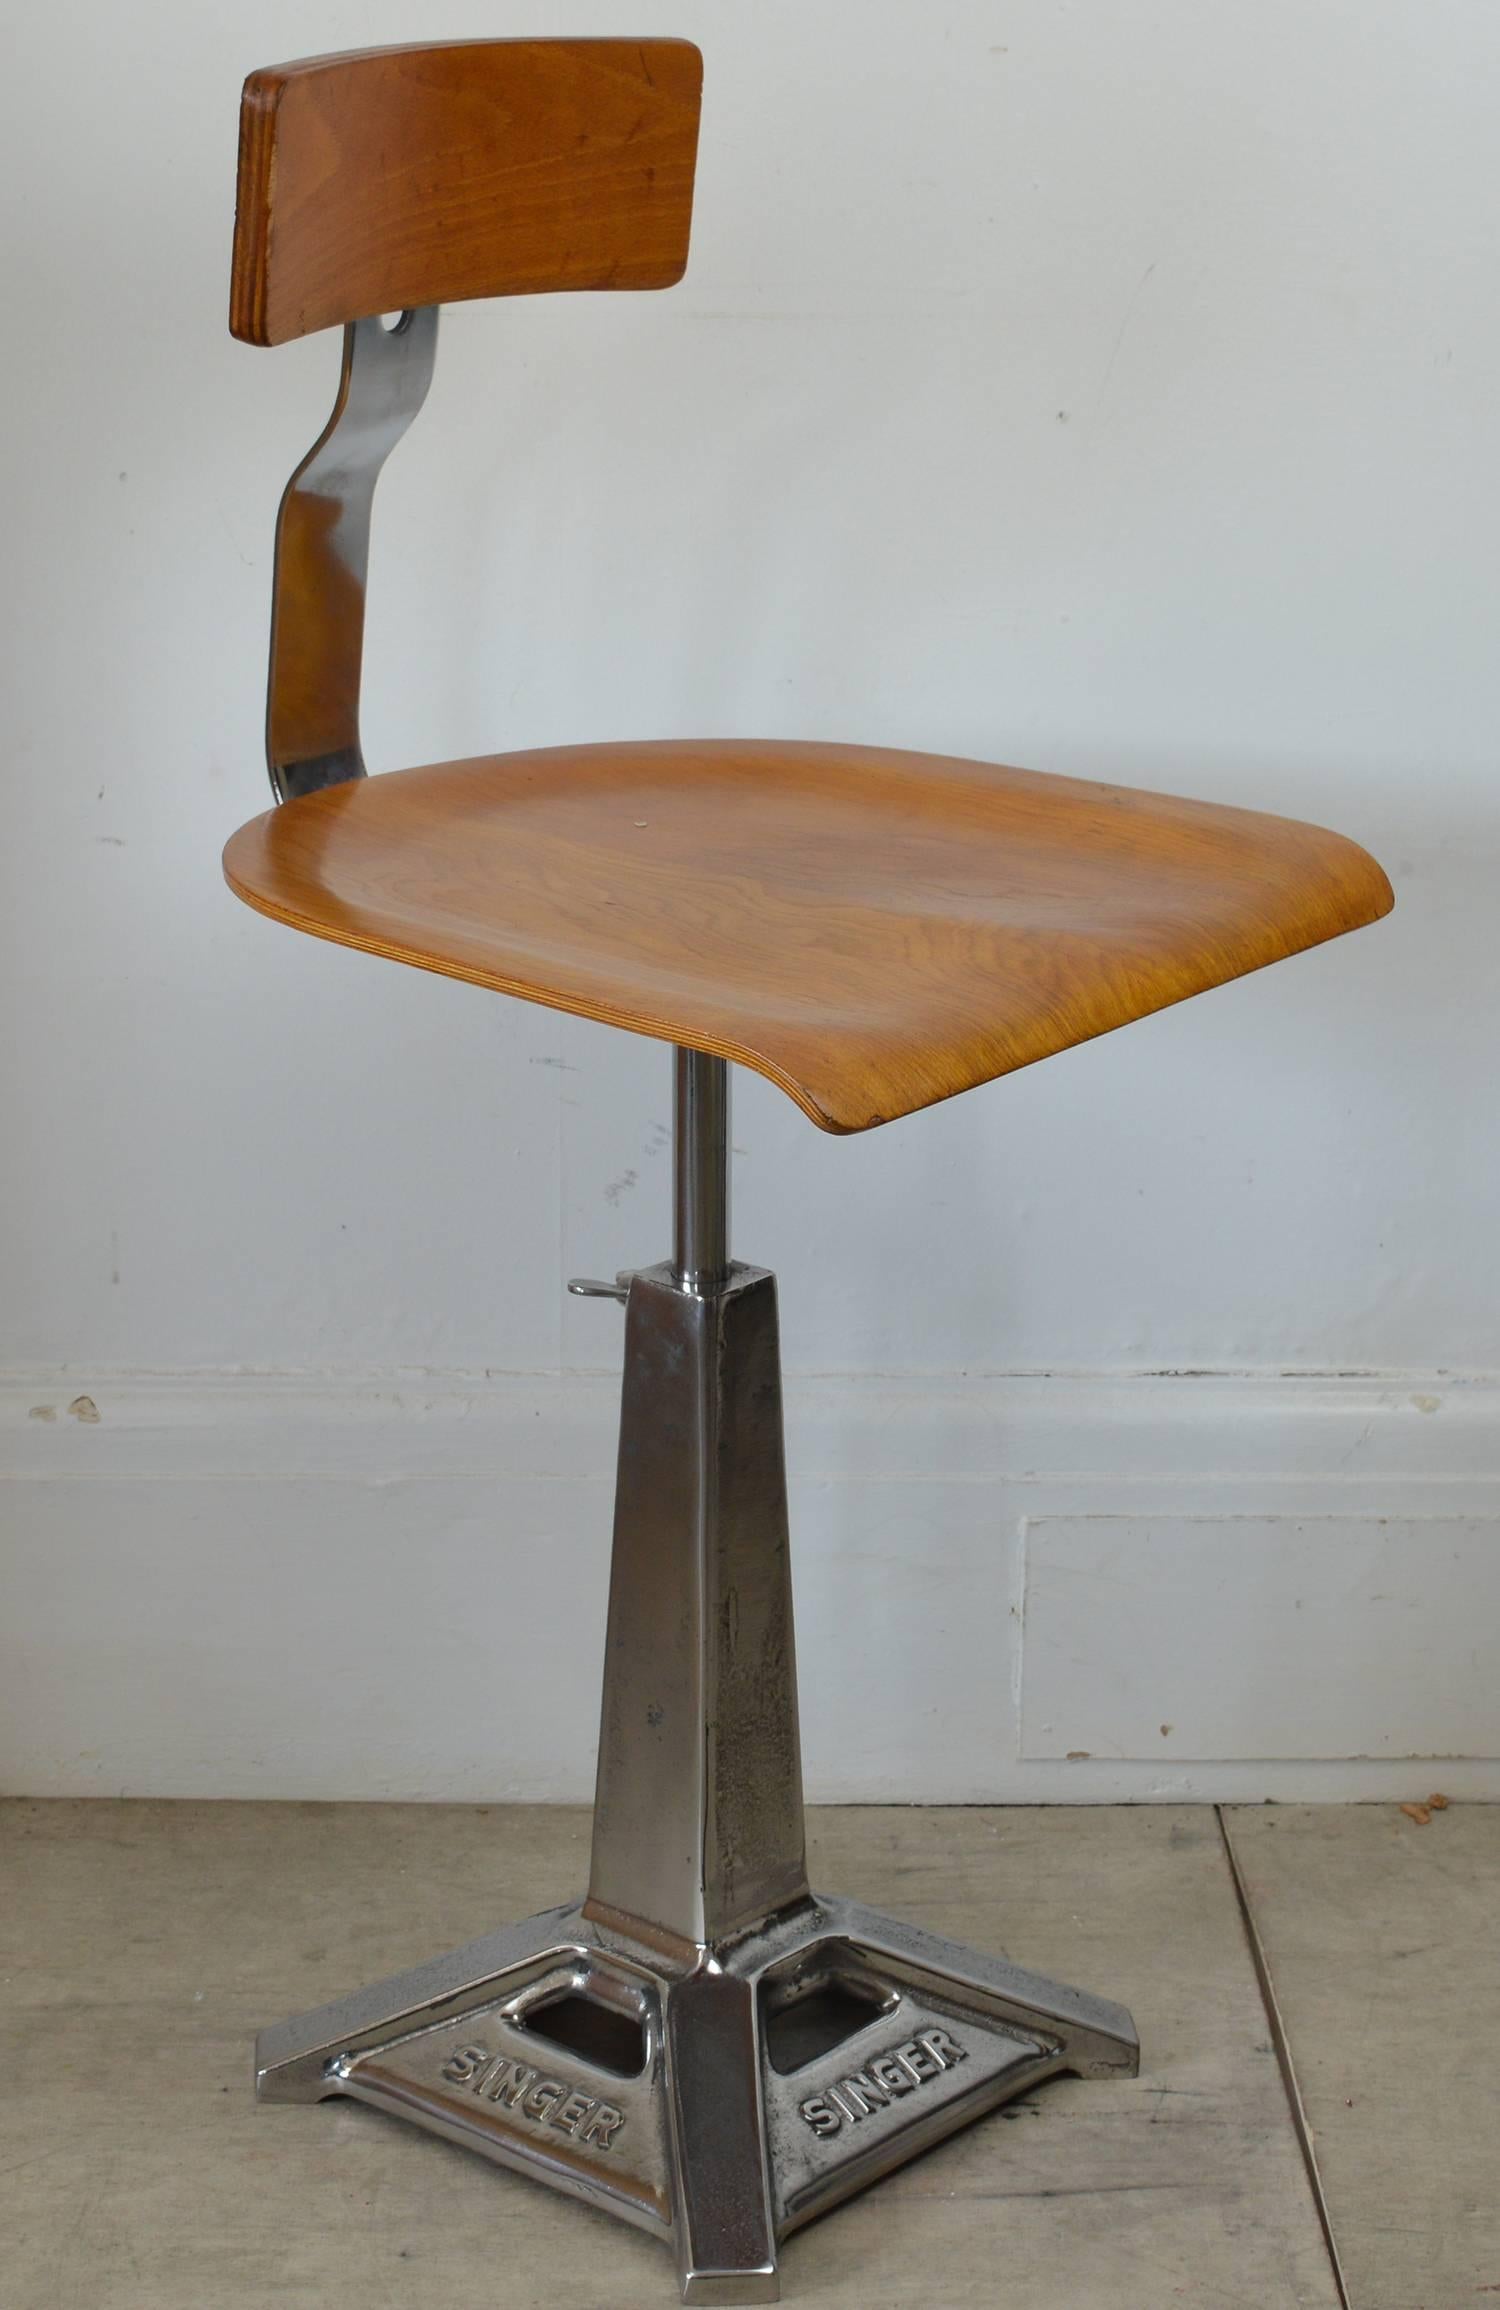 A brilliantly designed chair. Both comfortable and great looking. The chair is completely original. Just re-polished.

Ideal for a desk chair or for dining. I will be able to source similar chairs over the next few weeks if you want to make up a